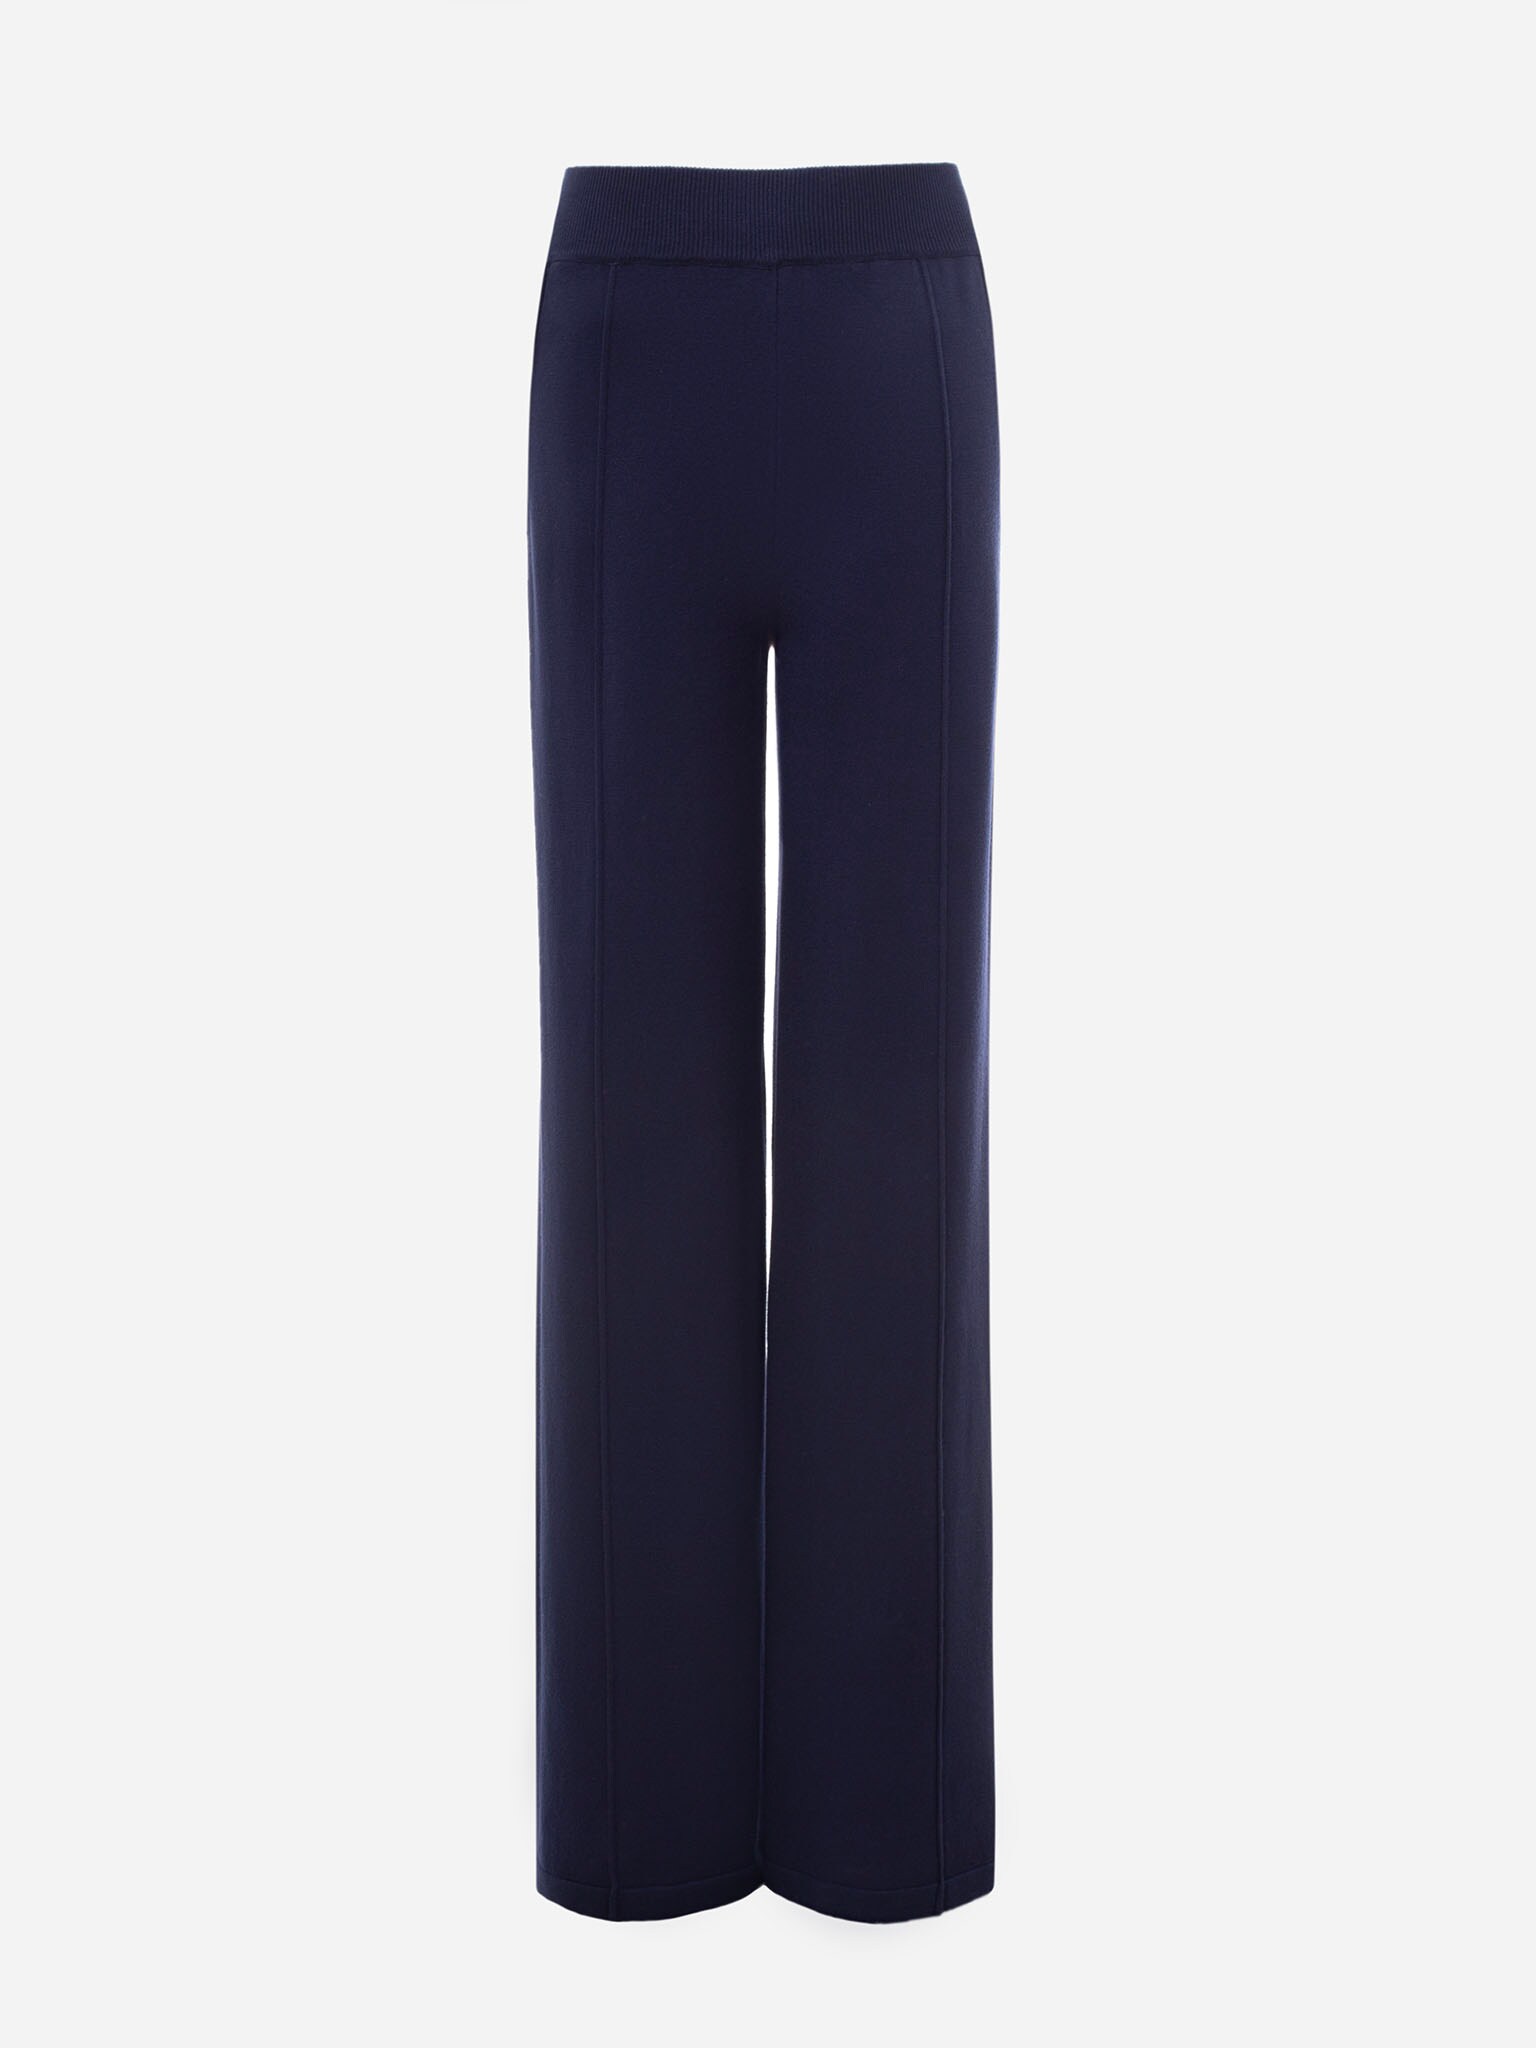 Wide trousers - Navy blue/Pinstriped - Ladies | H&M IN